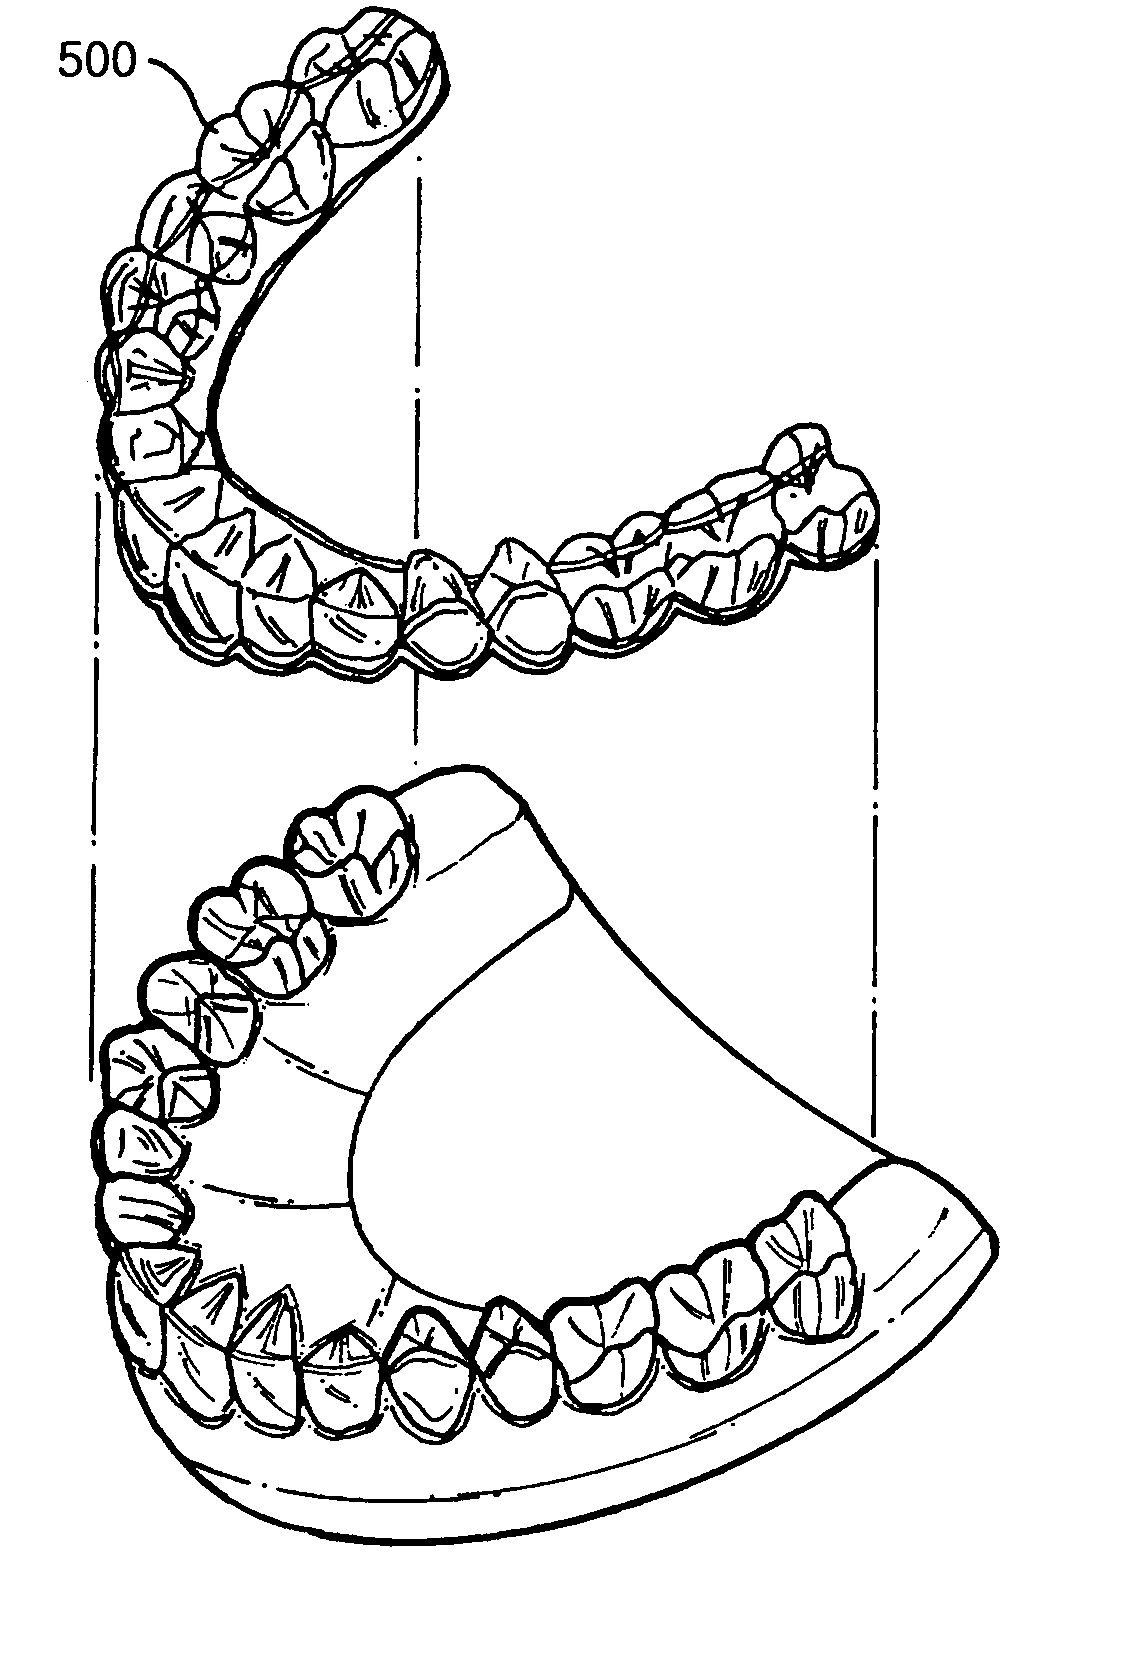 Orthodontic appliance by using a shape memory polymer